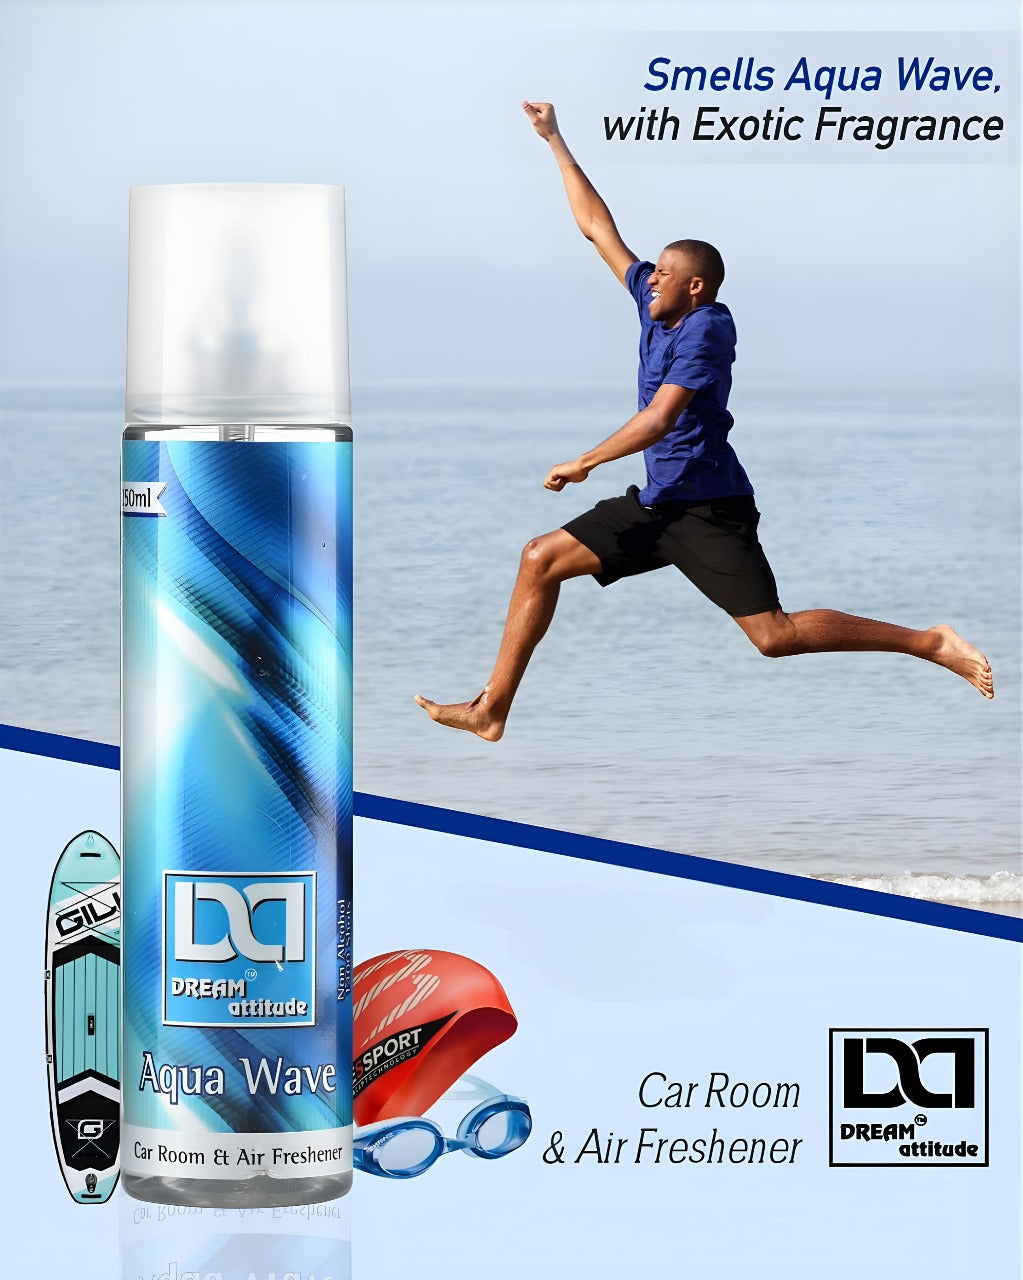 DREAM attitude Aqua Water Air Freshener: Revitalizing Vibes for Everyday Tranquility